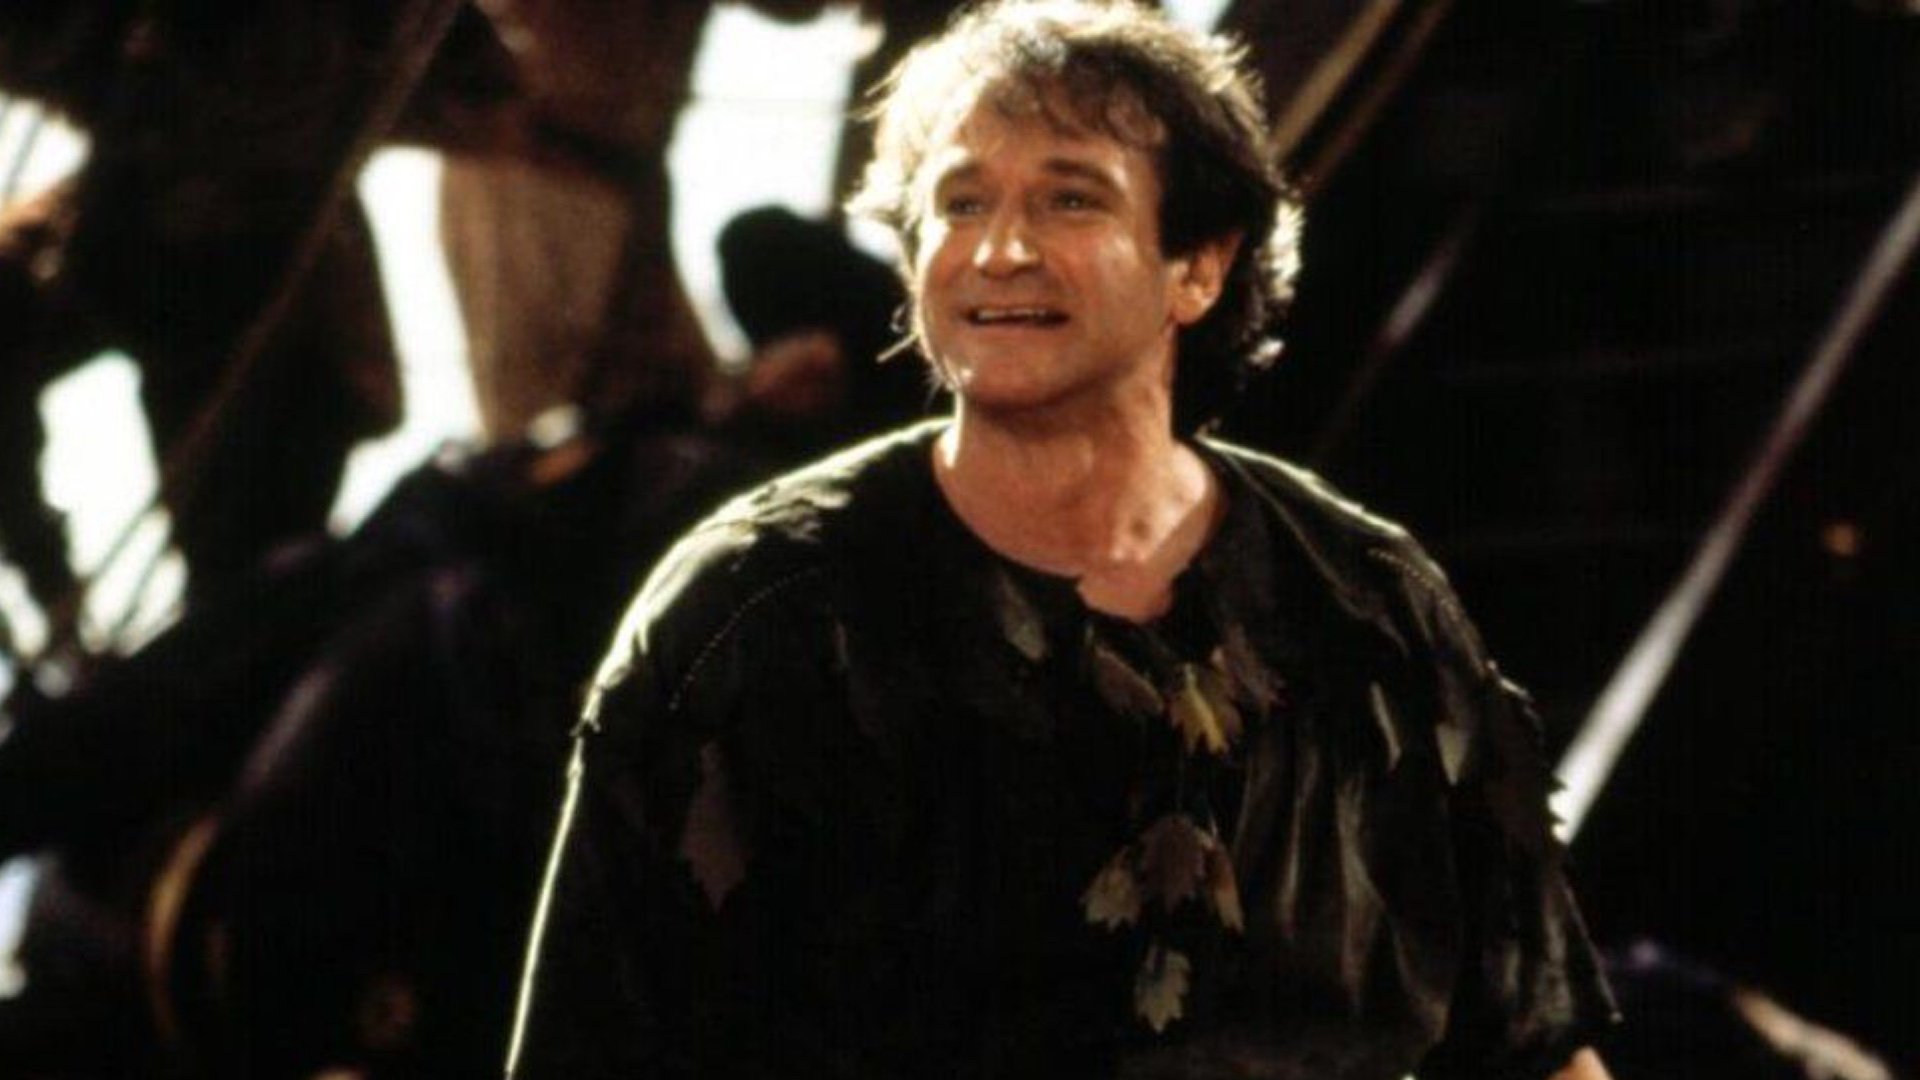 Beautifully Fun Behind-The-Scenes Footage of Robin Williams on The